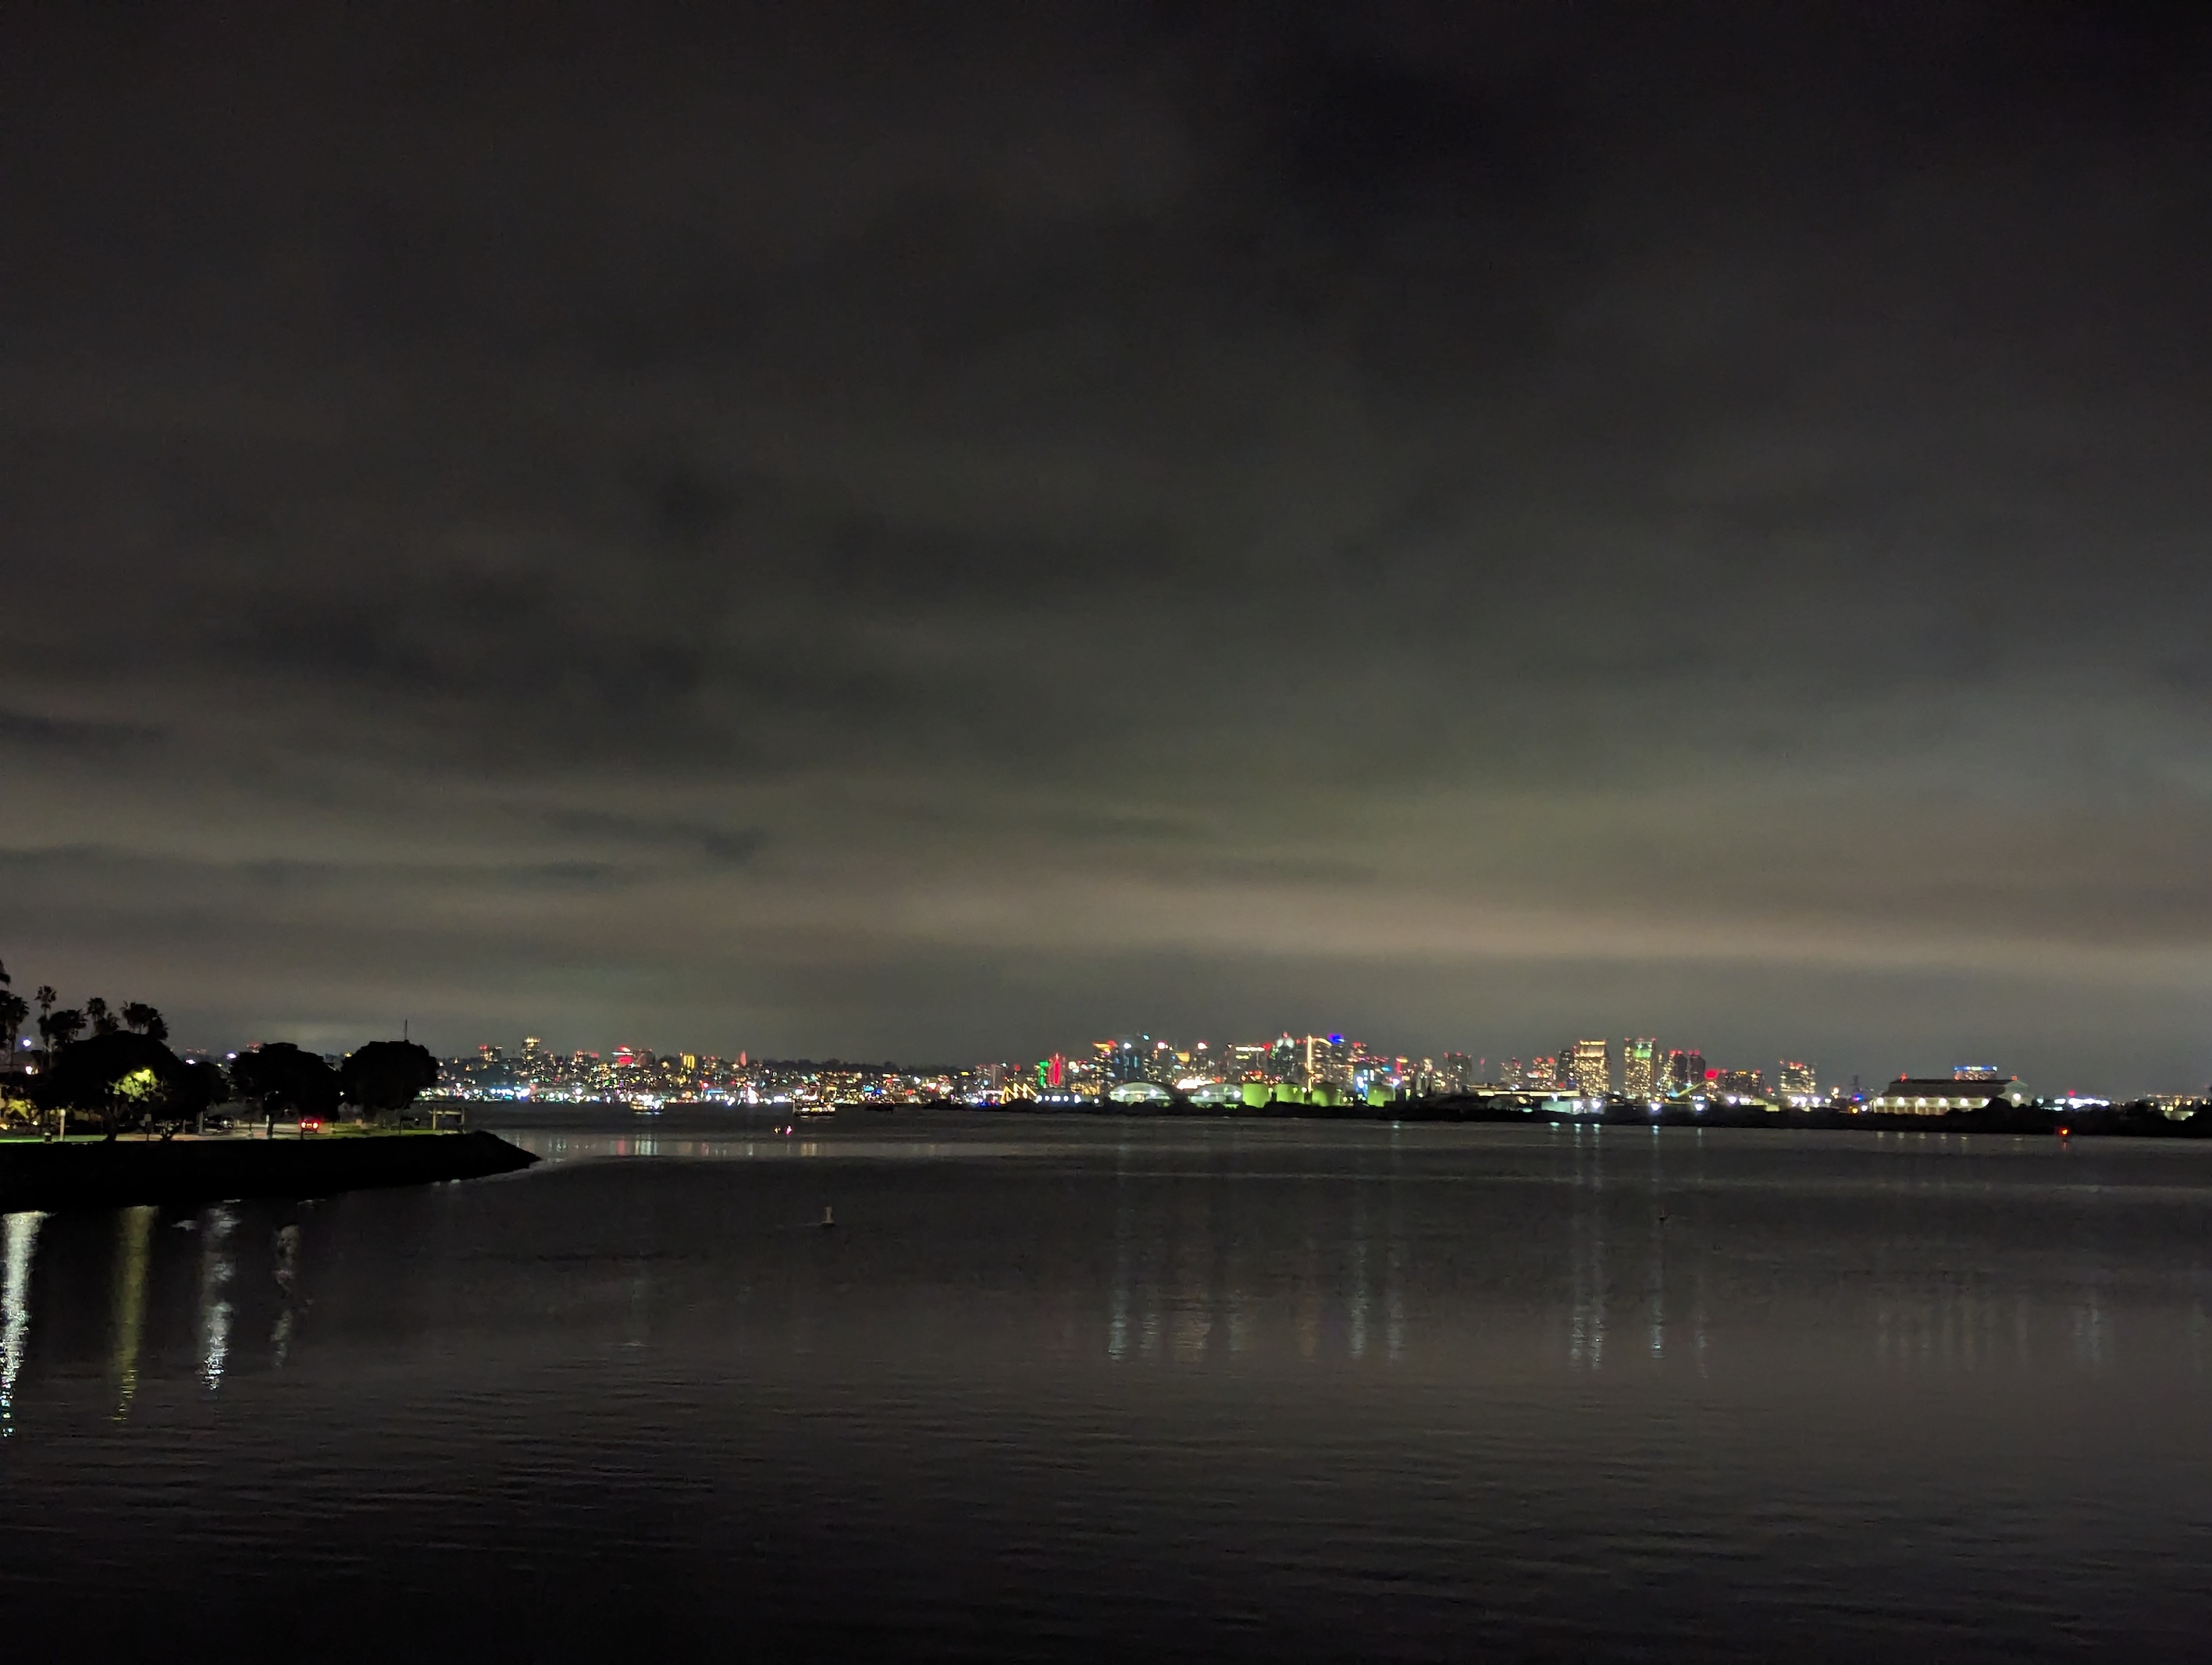 Night image of city skyline in the distance, across the water.